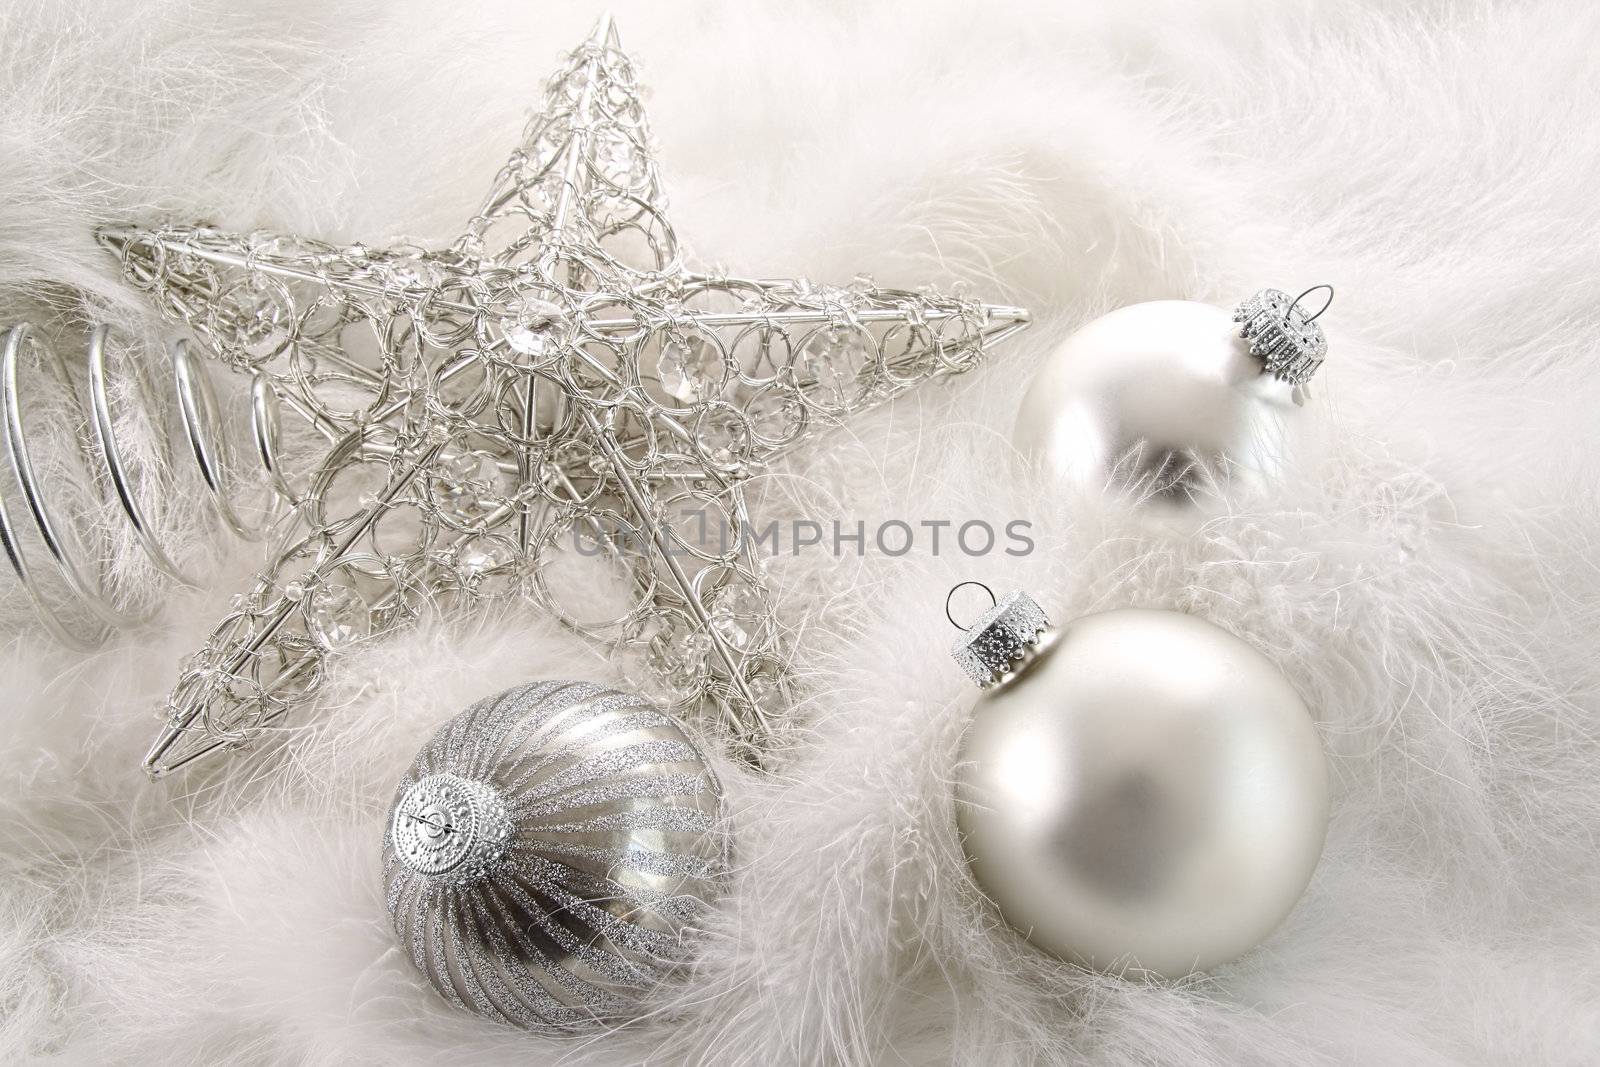 Silver holiday ornaments laying in white feathers